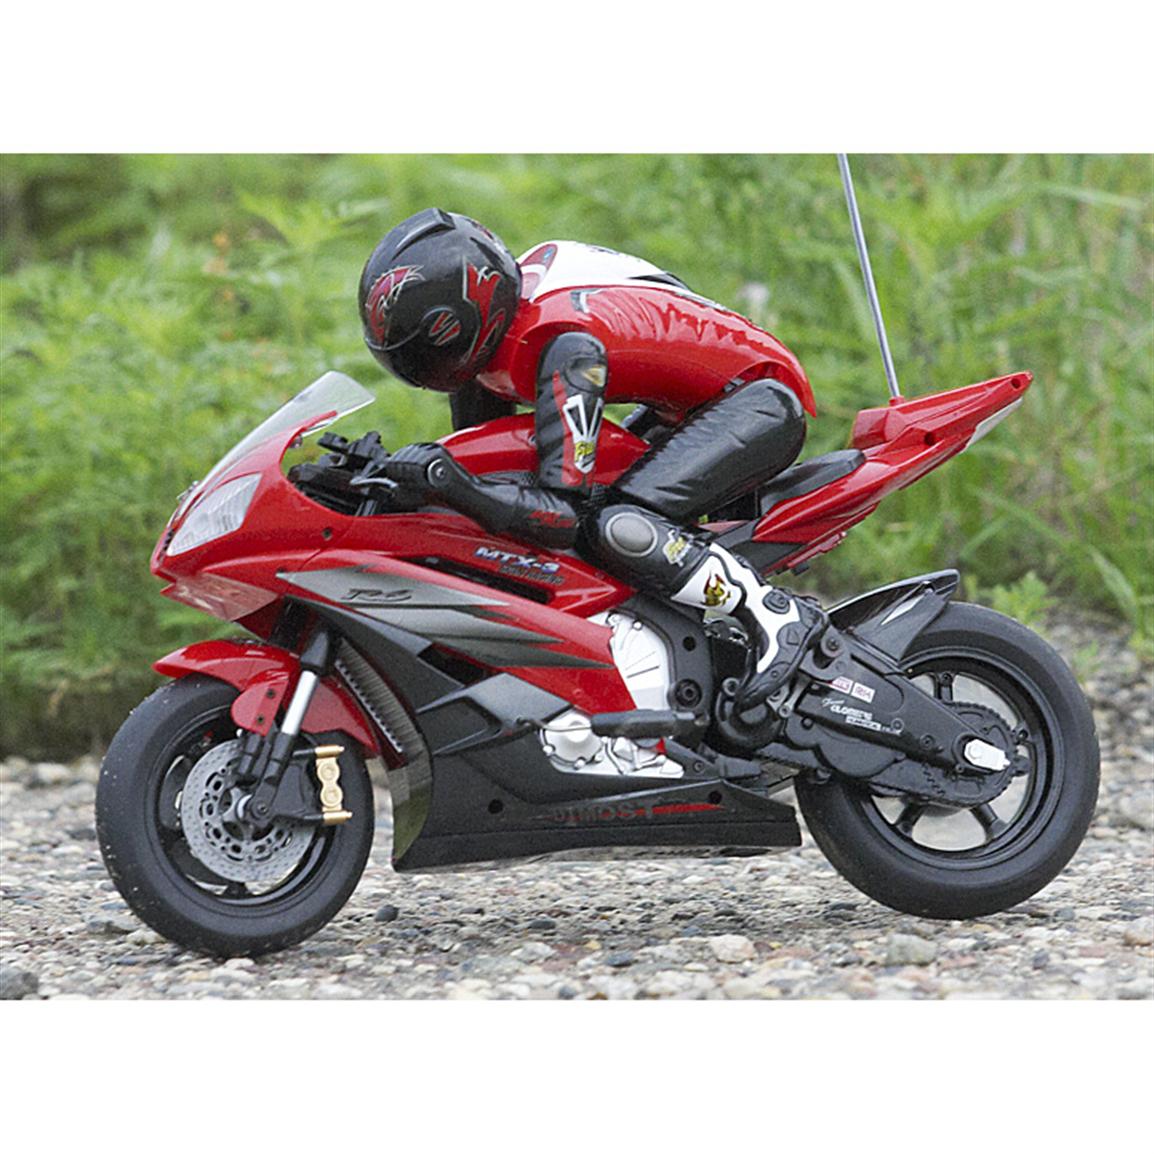 Radio - controlled Motorcycle - 212117, Remote Control Toys at